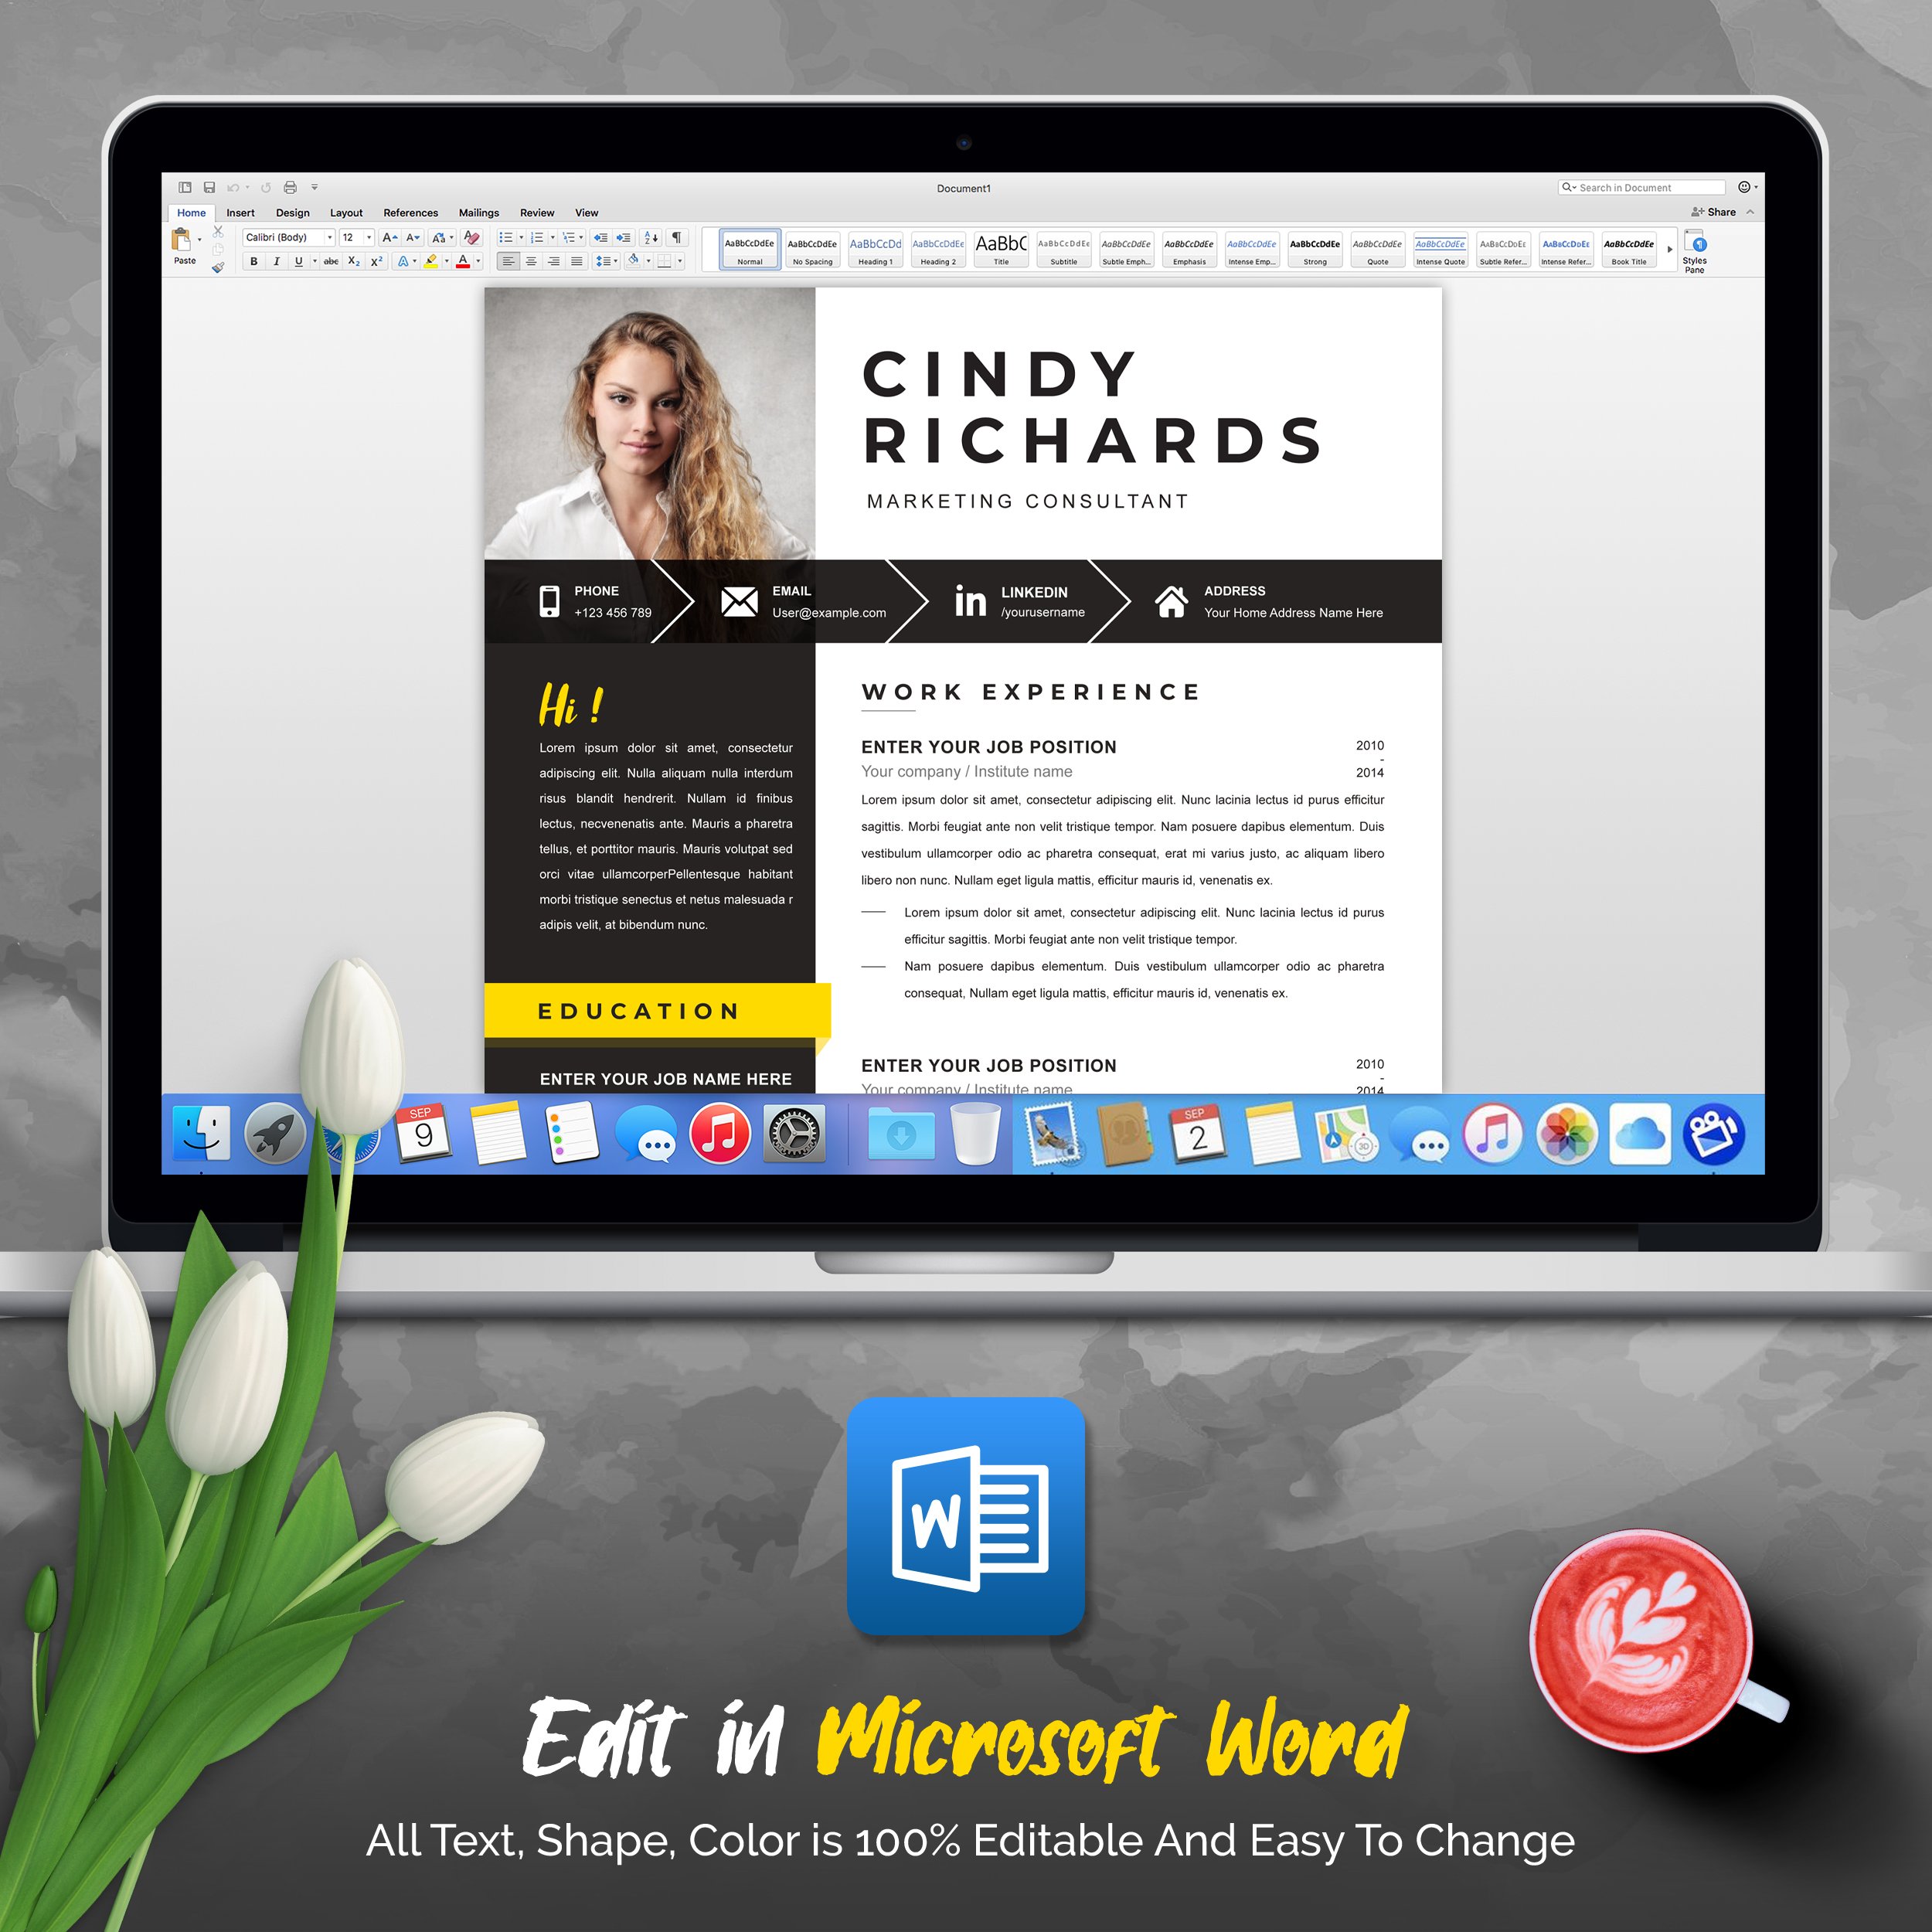 04 4 pages professional ms word aple pages eps photoshop psd resume cv design template design by resume inventor 31